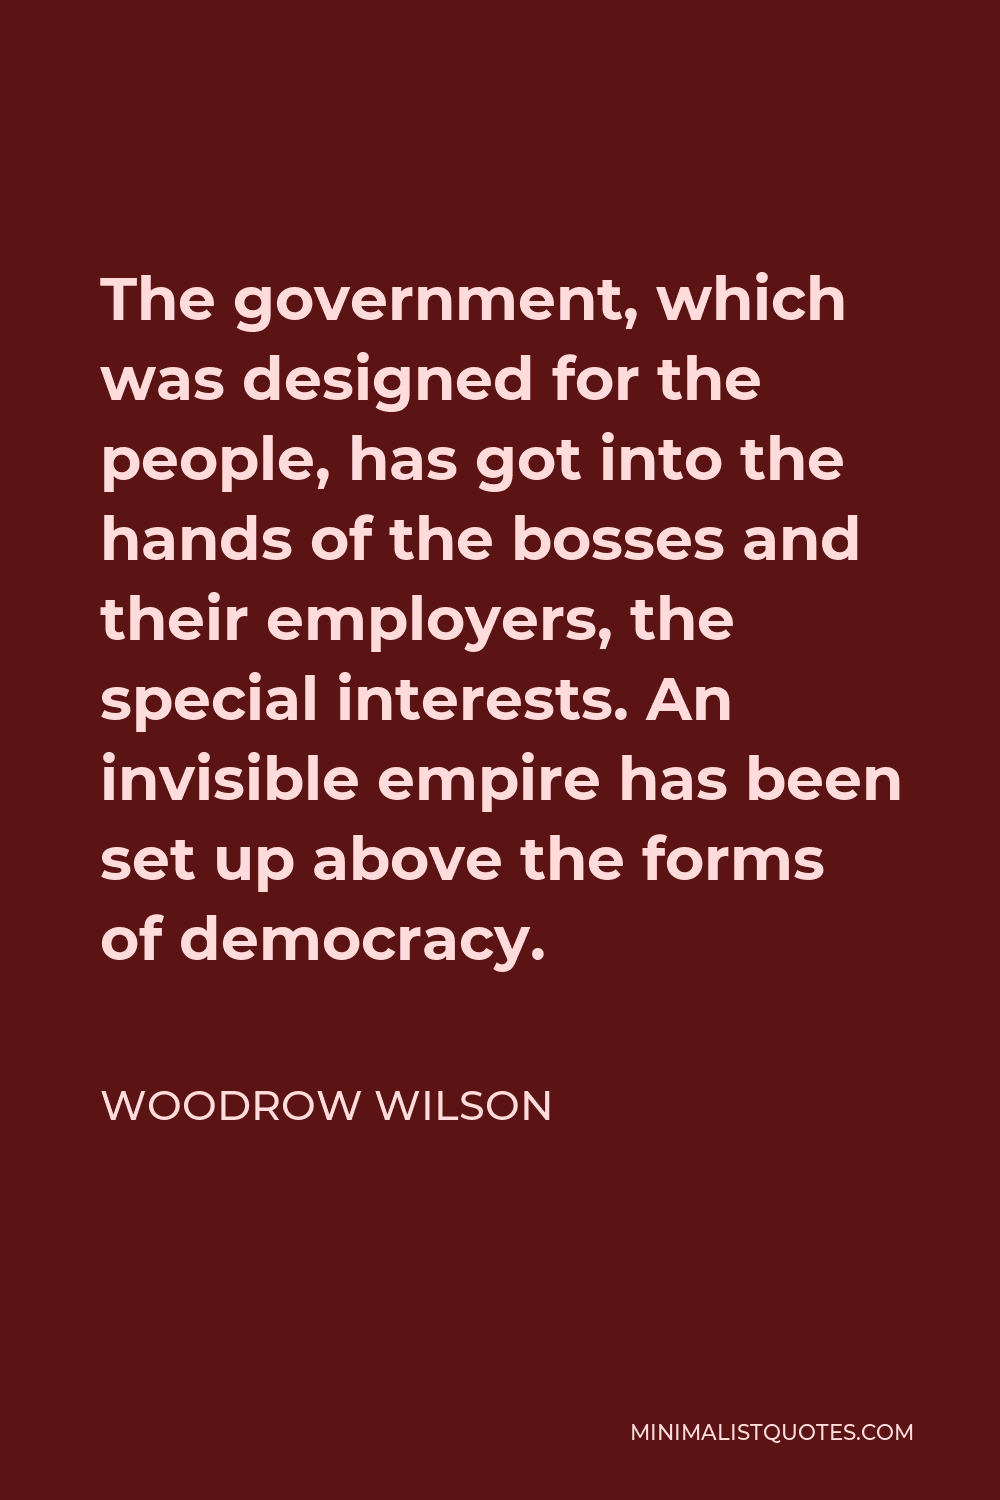 Woodrow Wilson Quote - The government, which was designed for the people, has got into the hands of the bosses and their employers, the special interests. An invisible empire has been set up above the forms of democracy.